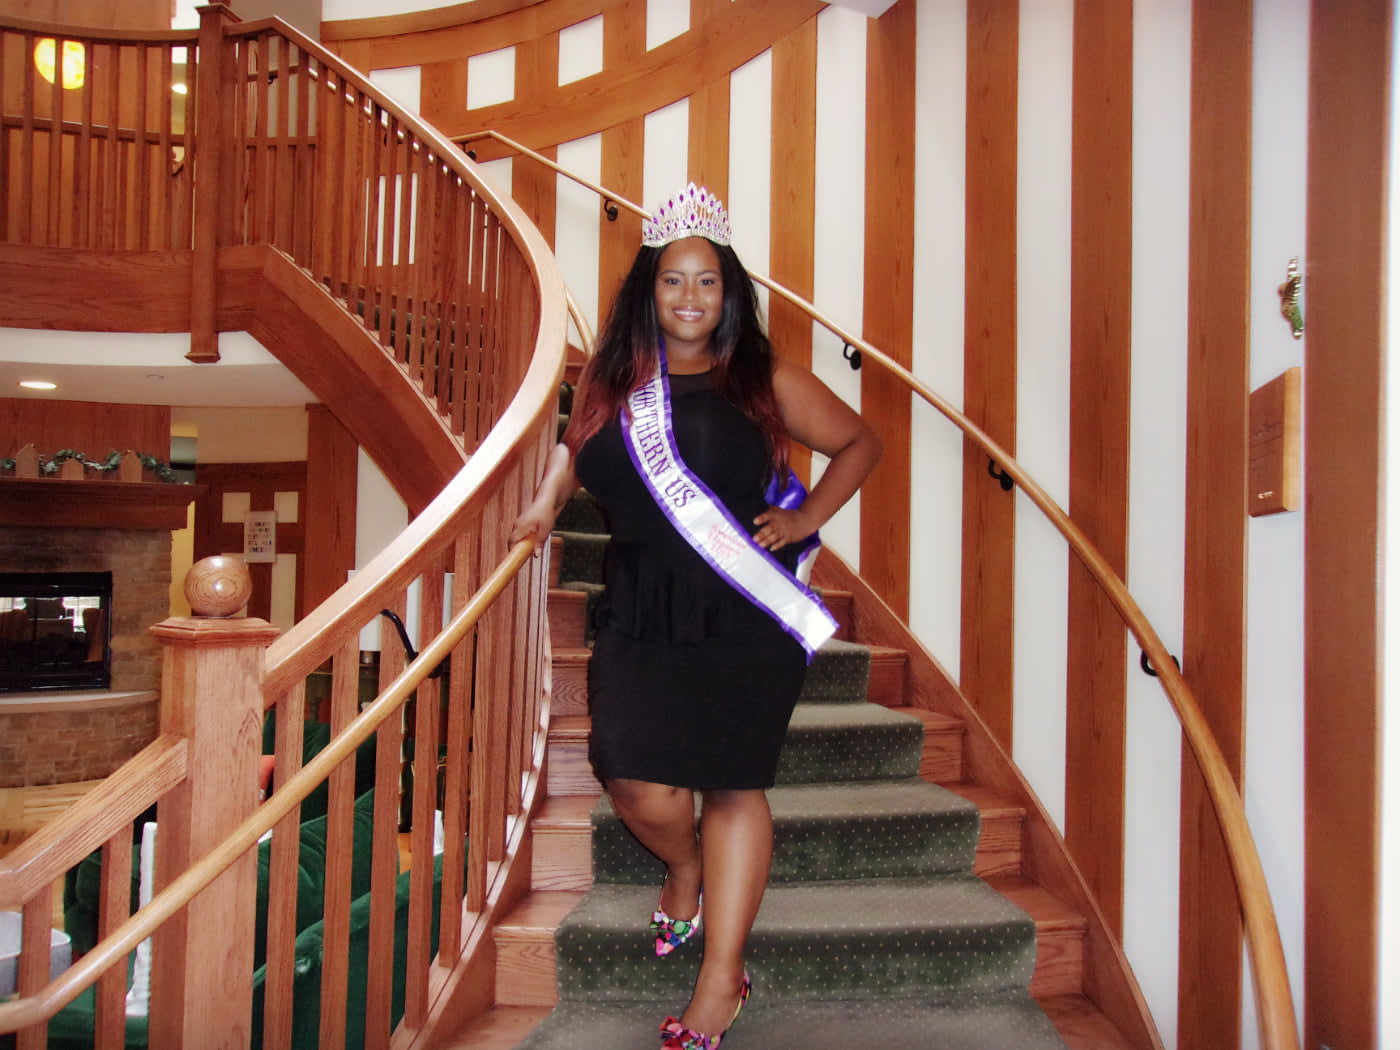 BREAKING BARRIERS IN BUSINESS AND BEAUTY PAGEANTS